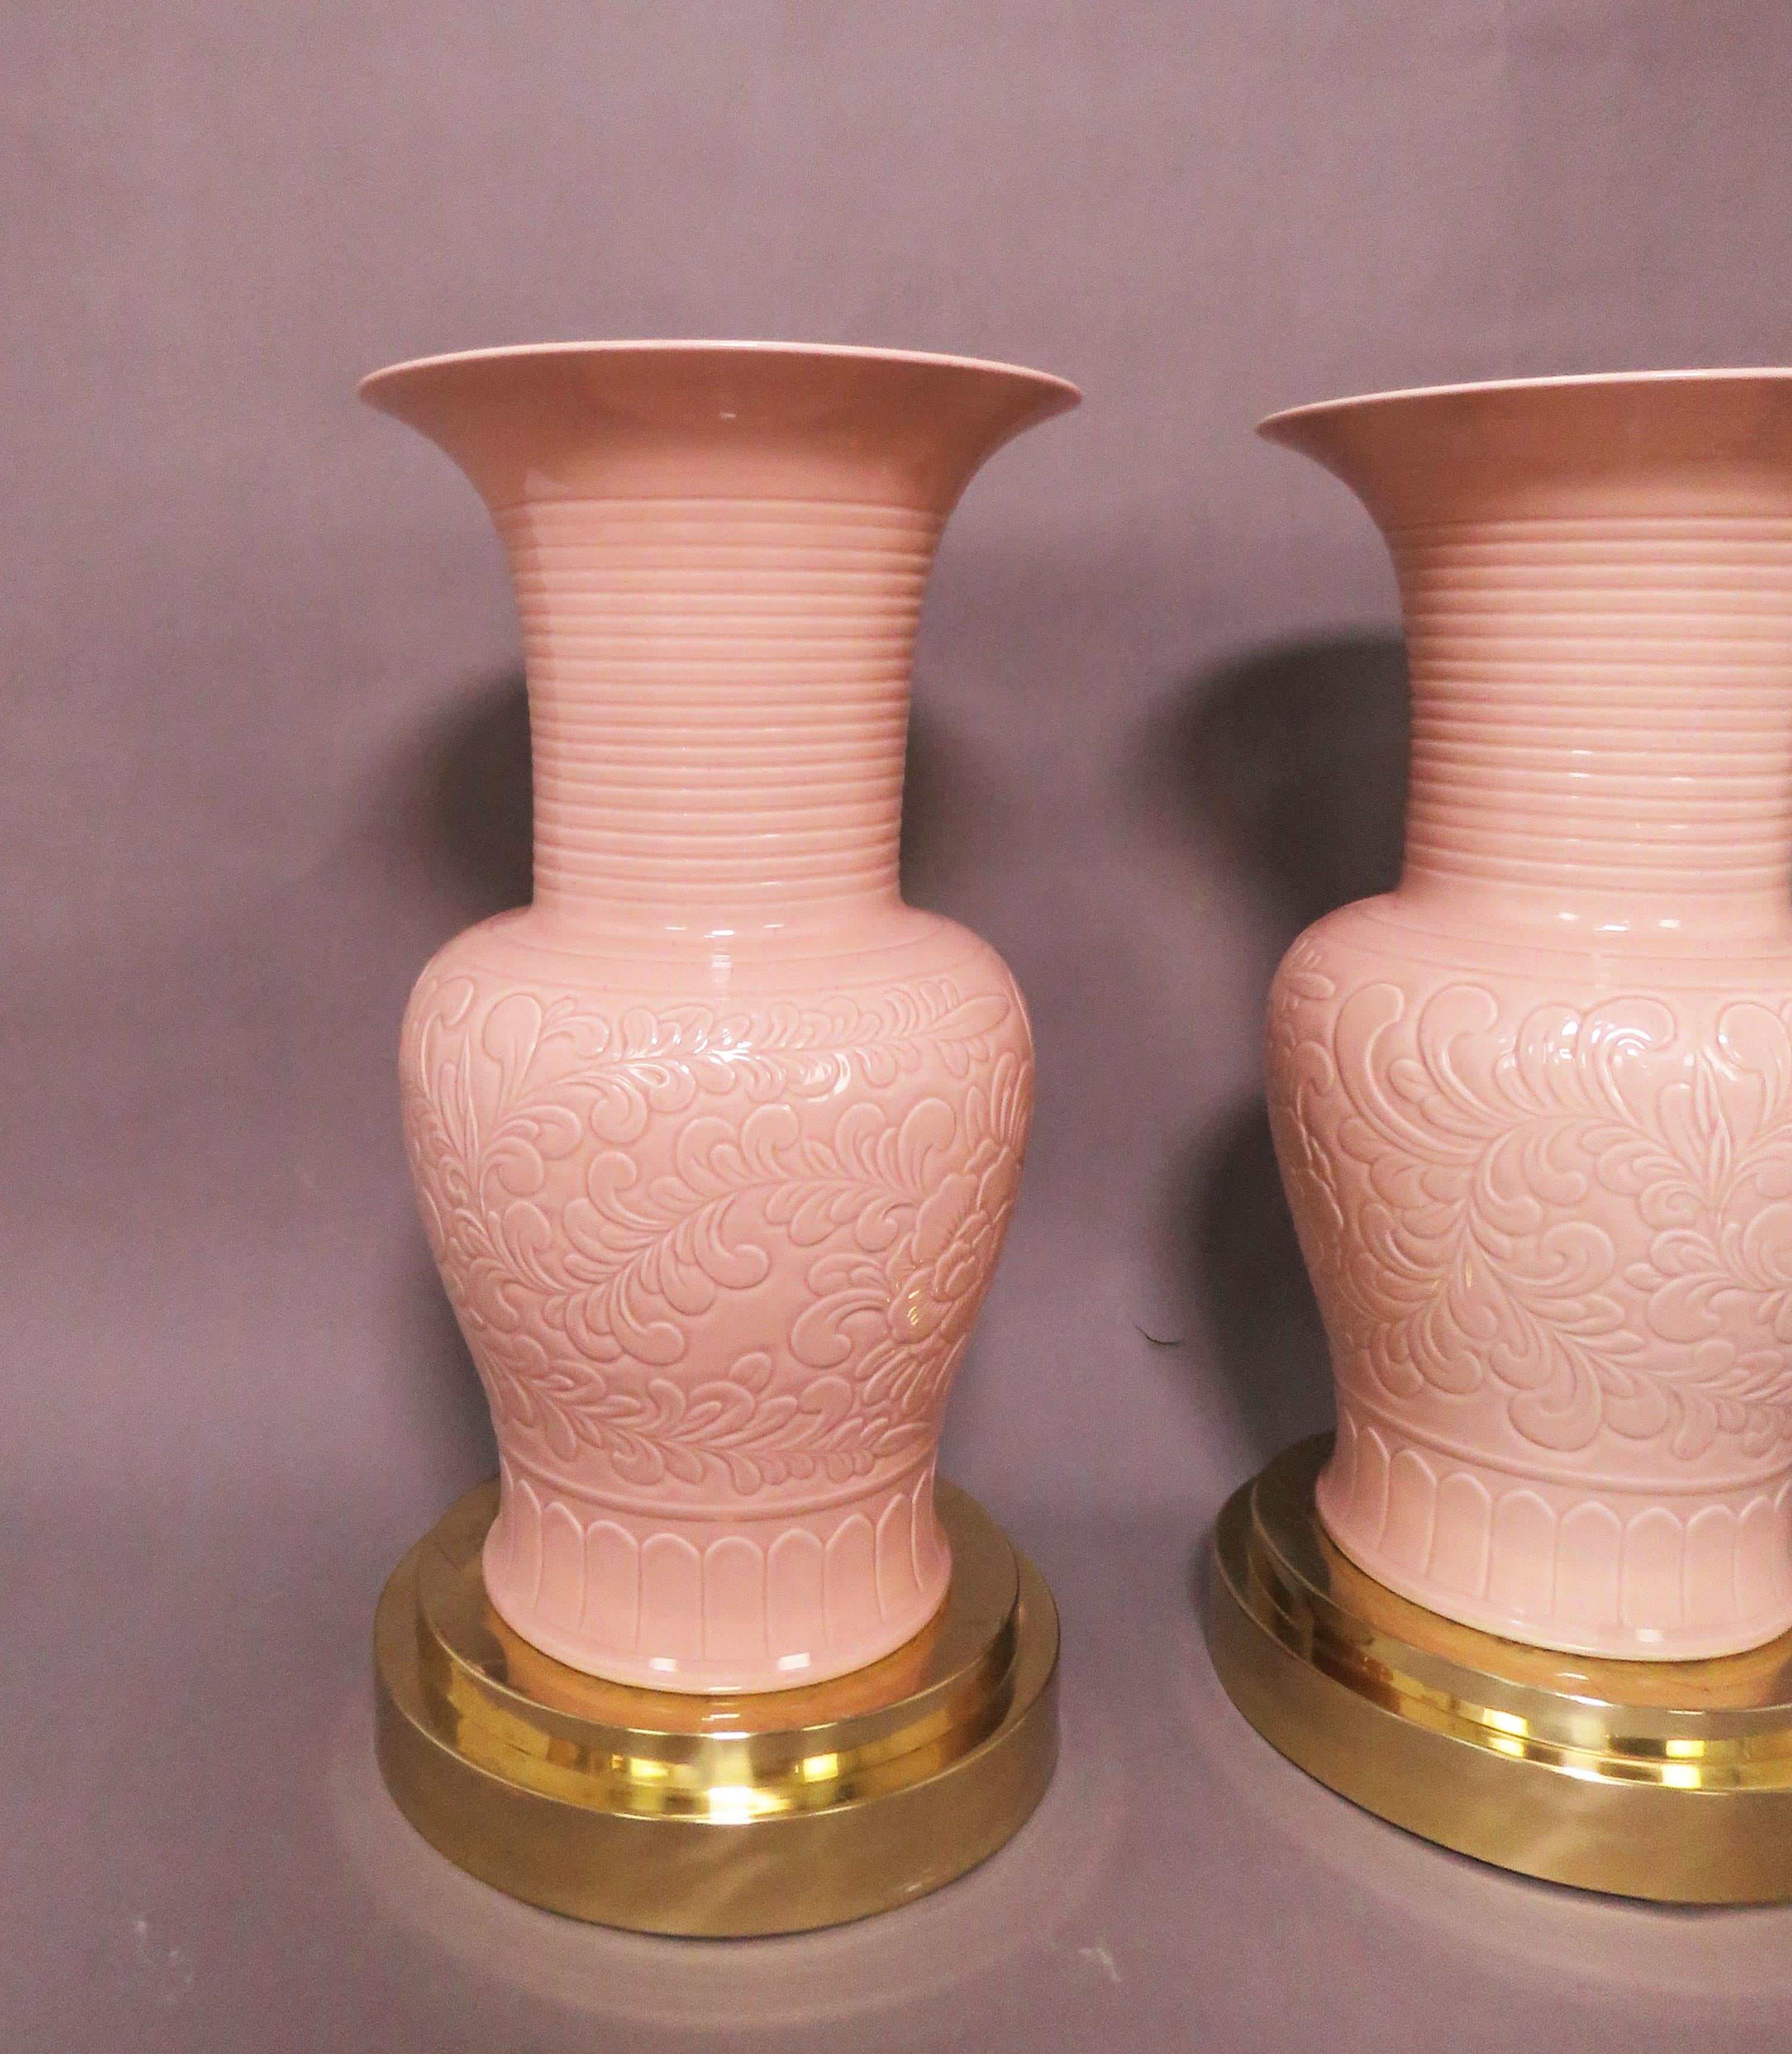 Pair of porcelain palace floor vases in pink conch glaze on brass stands, circa 1980s. Each vase measures: 26.25